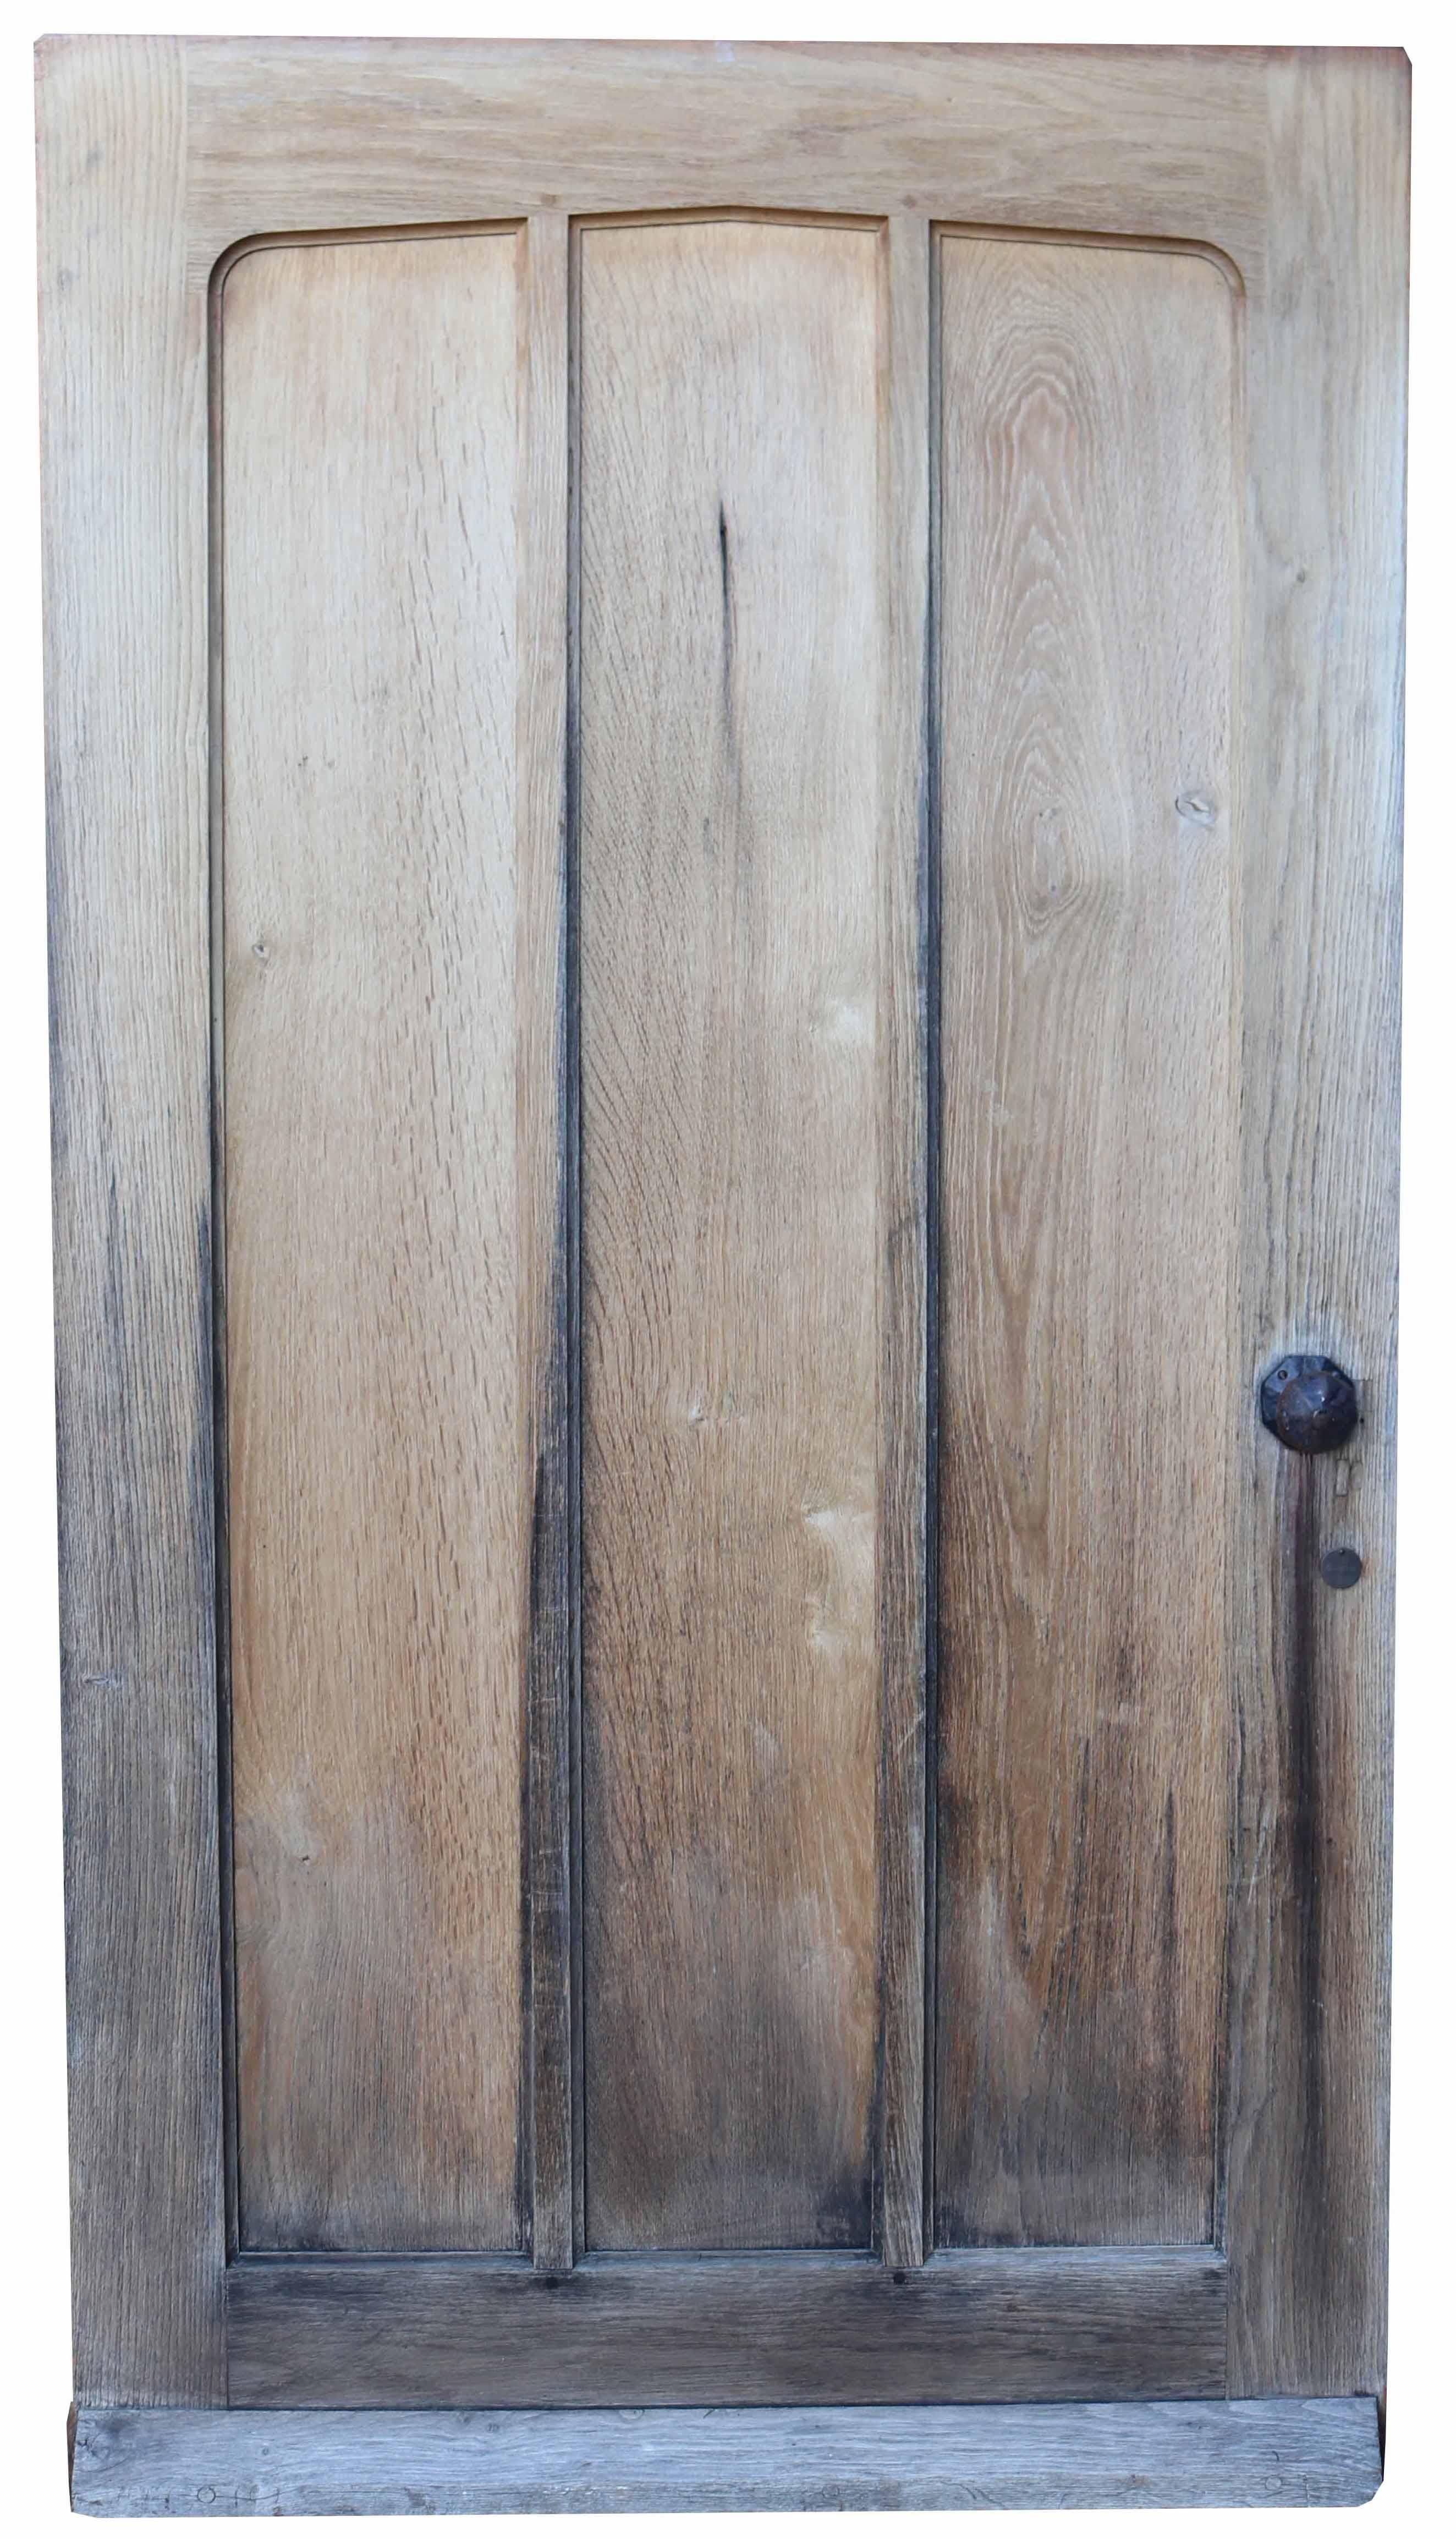 About

This door was reclaimed from a cottage in the Cotswolds.

Condition report

This door is in good structural condition with a bare wood finish. Lightly weathered Front side. There are some water staining marks to the bottom of the back